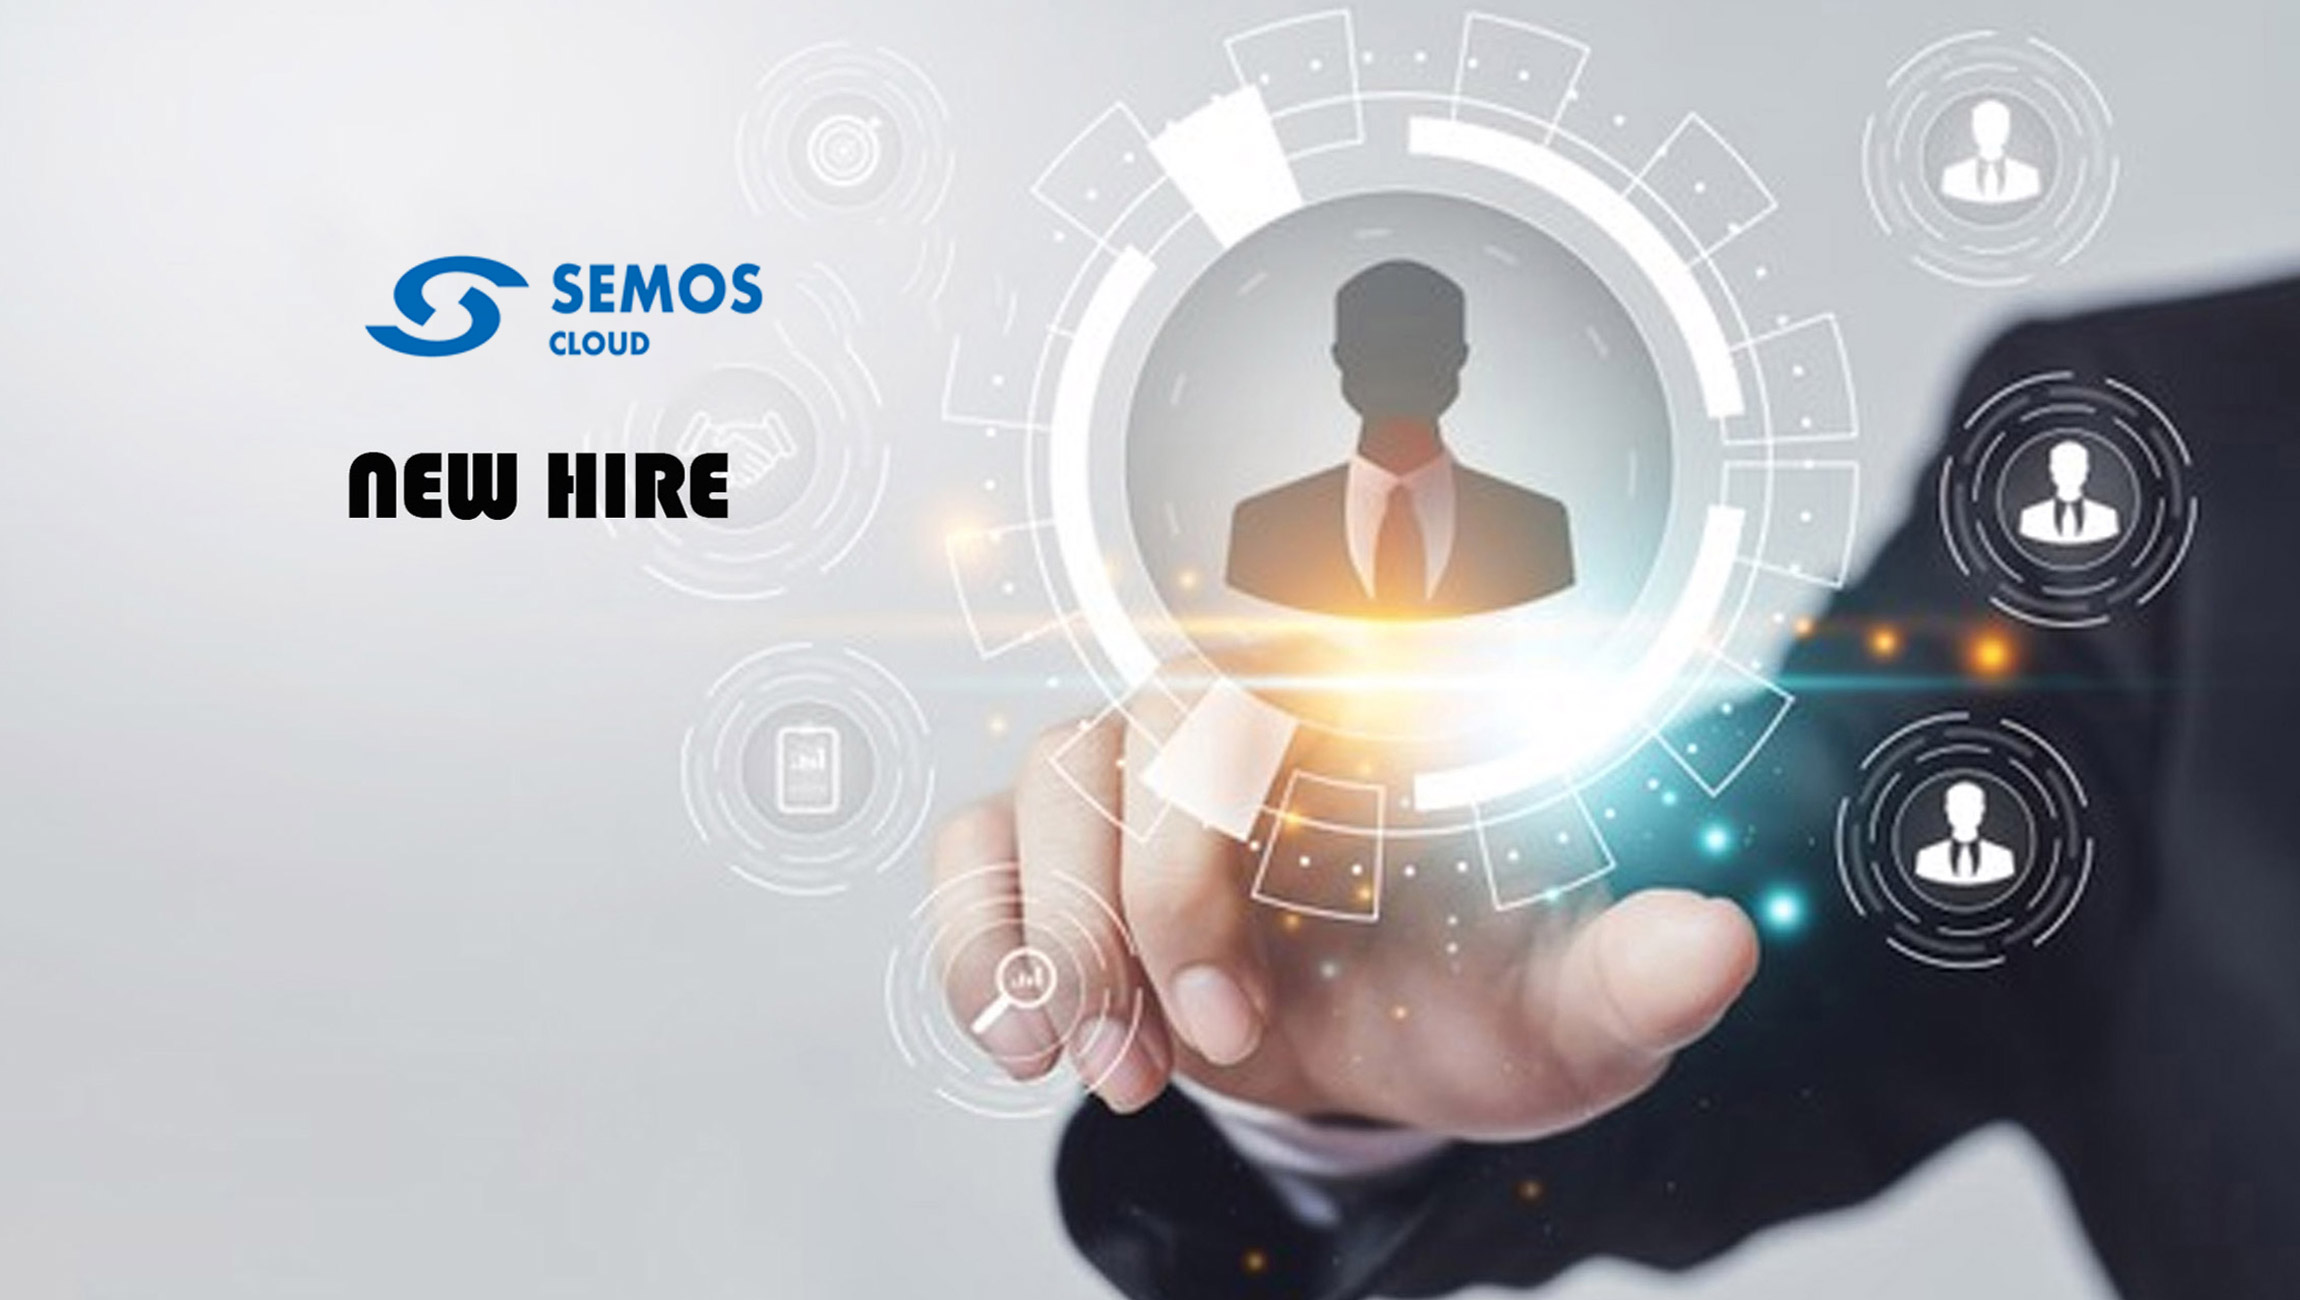 Semos Cloud Appoints Filip Misovski as New Chief Executive Officer